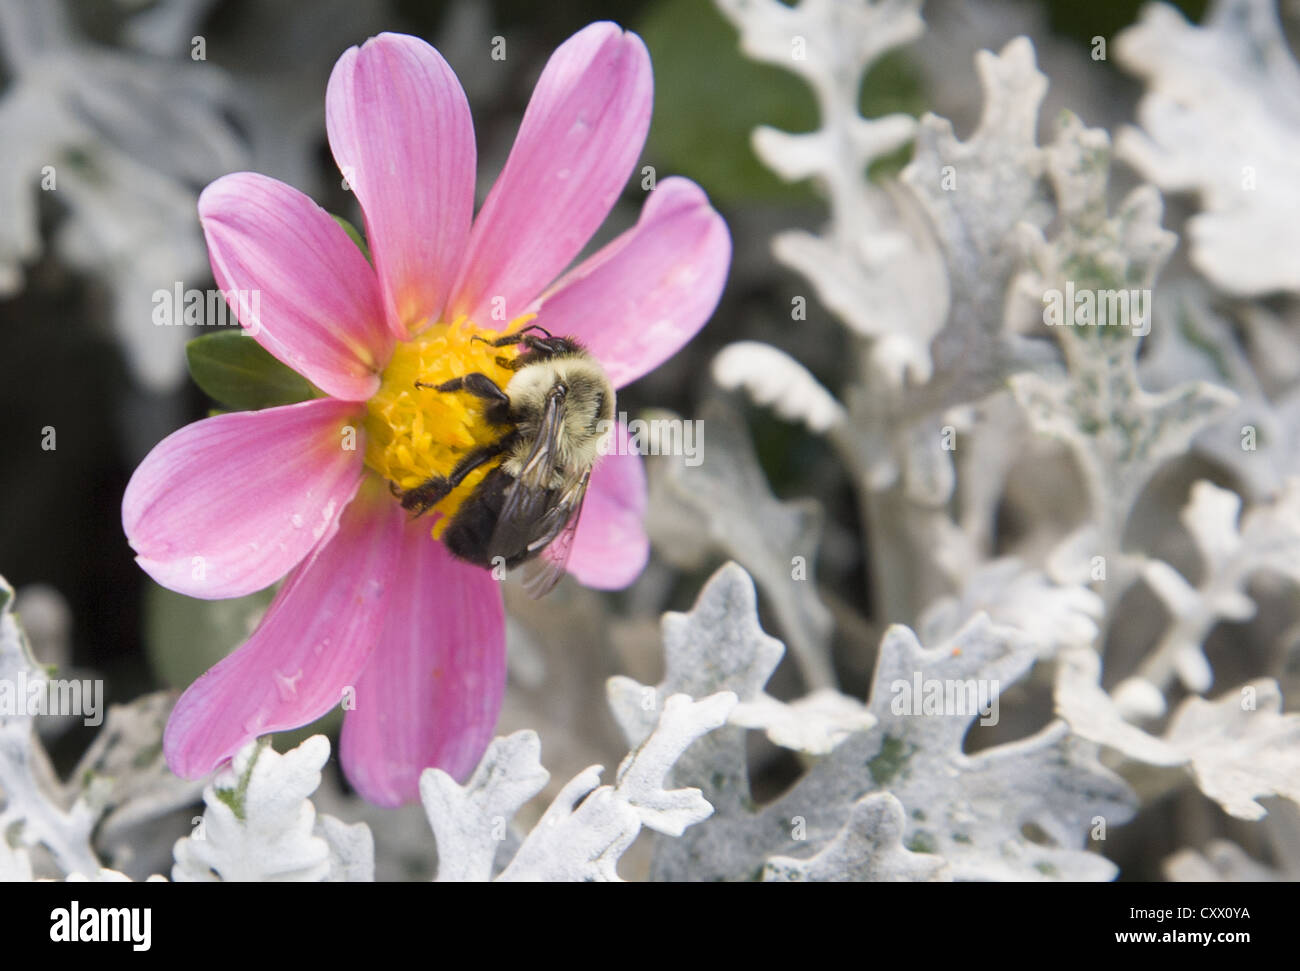 Bumble Bee gathers nectar to make honey from a Dahlia flower at the Brooklyn Botanic Garden. Stock Photo